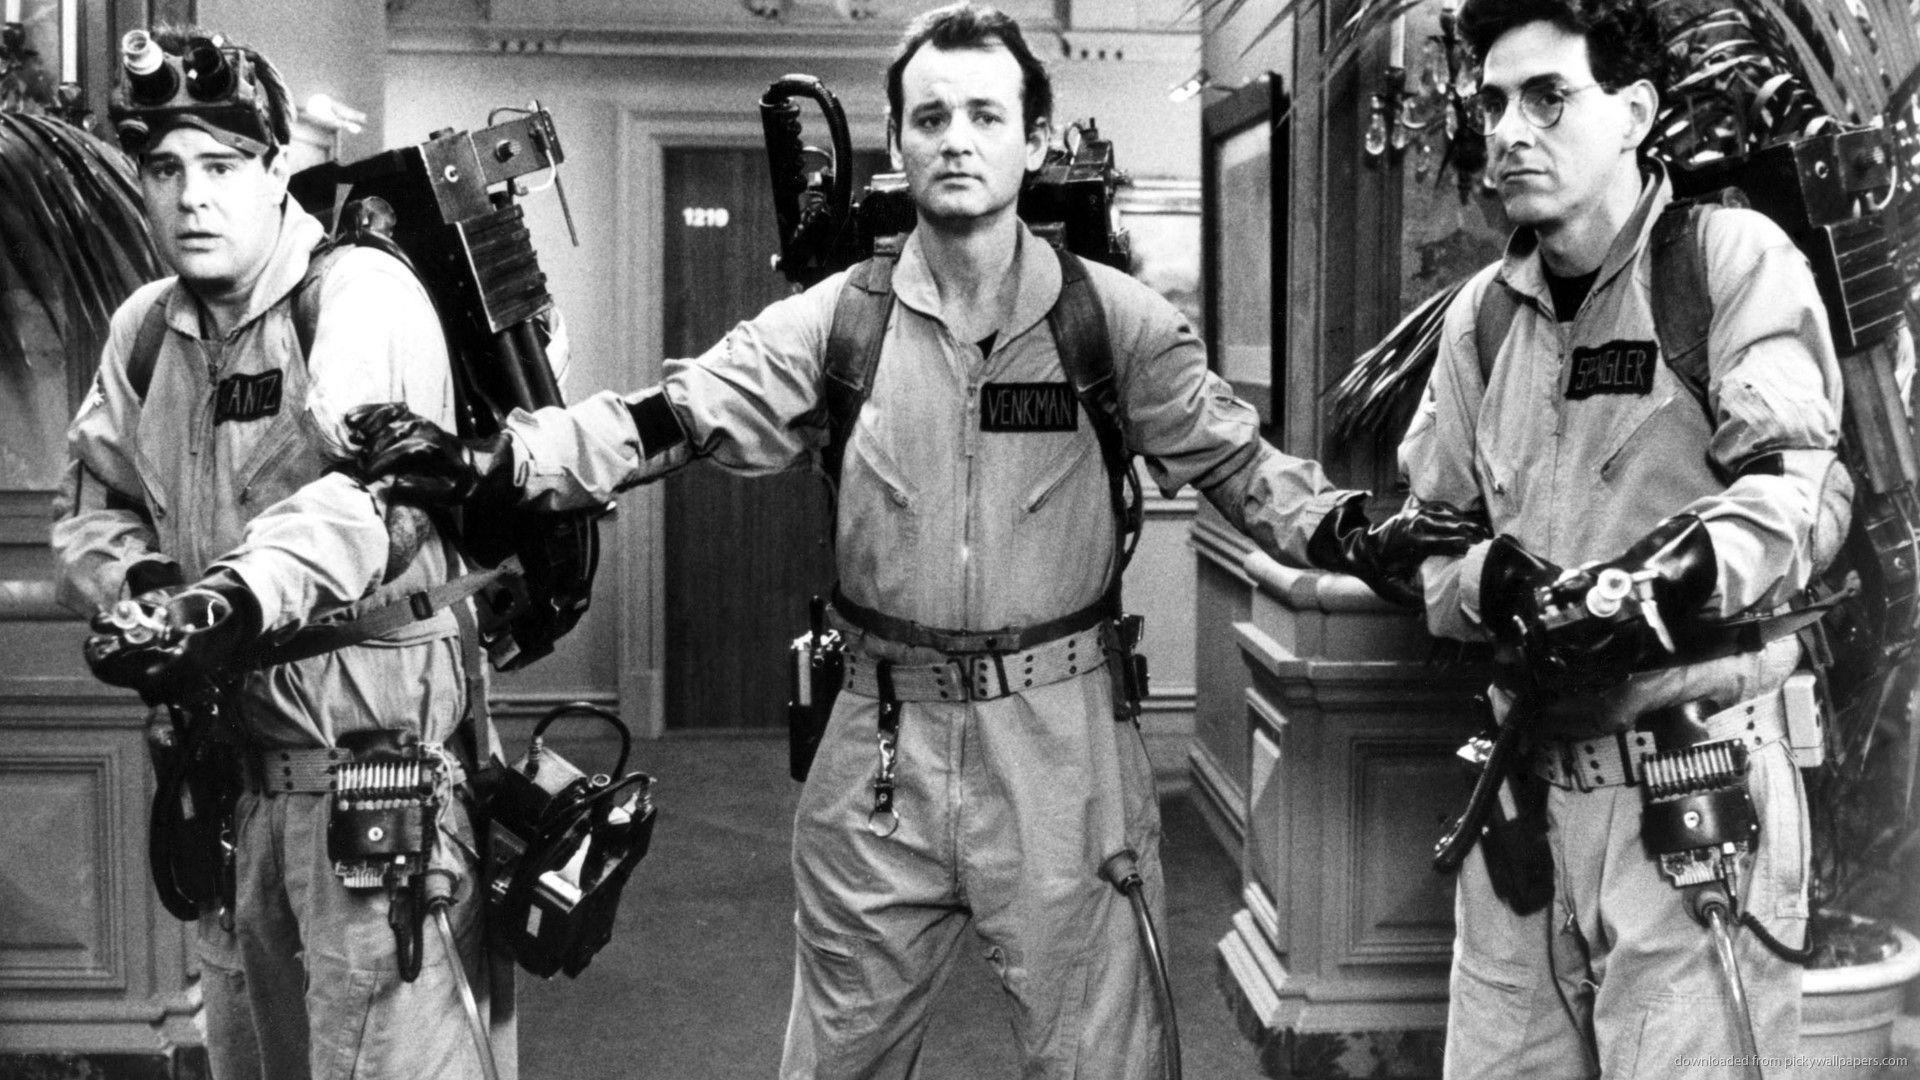 Download 1920x1080 Ghostbusters Wallpaper